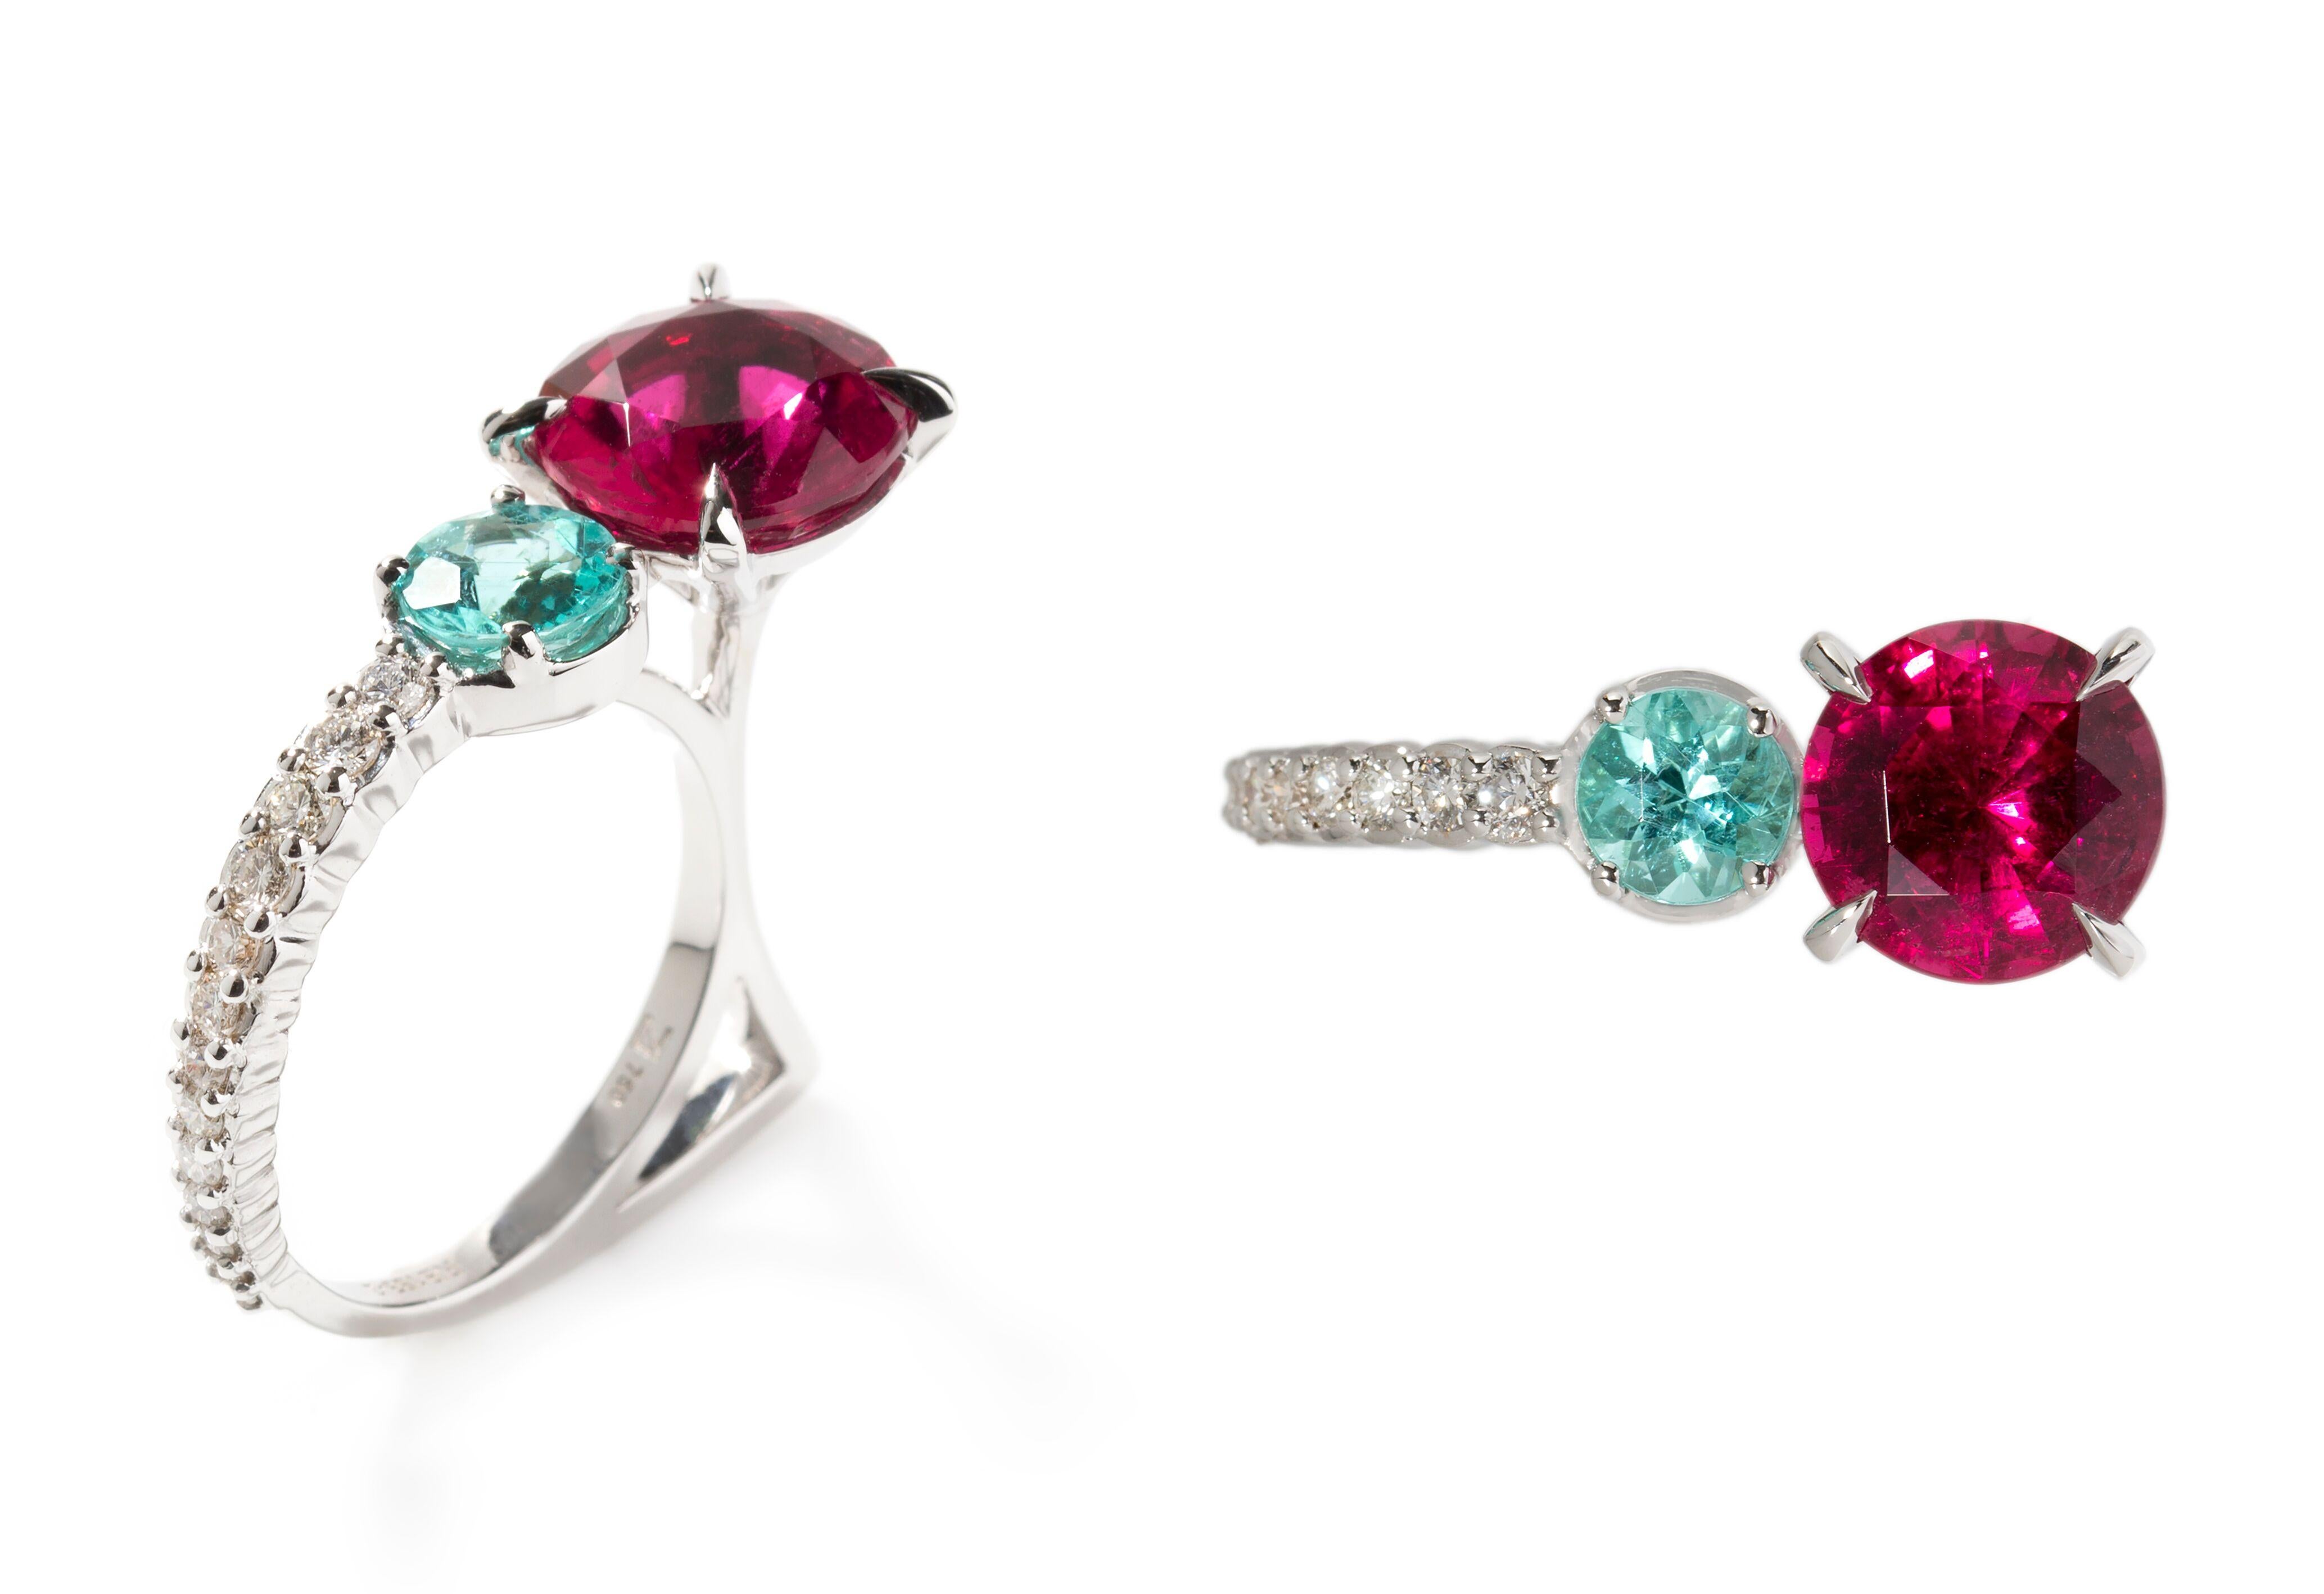 18 Karat Cat-style ring with round-faceted 3.83 Carat Rubellite, round-faceted 0.82 Carat Paraiba Tourmaline and 0.25 Carat round brilliant White Diamonds.  This unique ring has been designed exclusively by Brazilian jewellery designer Ara Vartanian